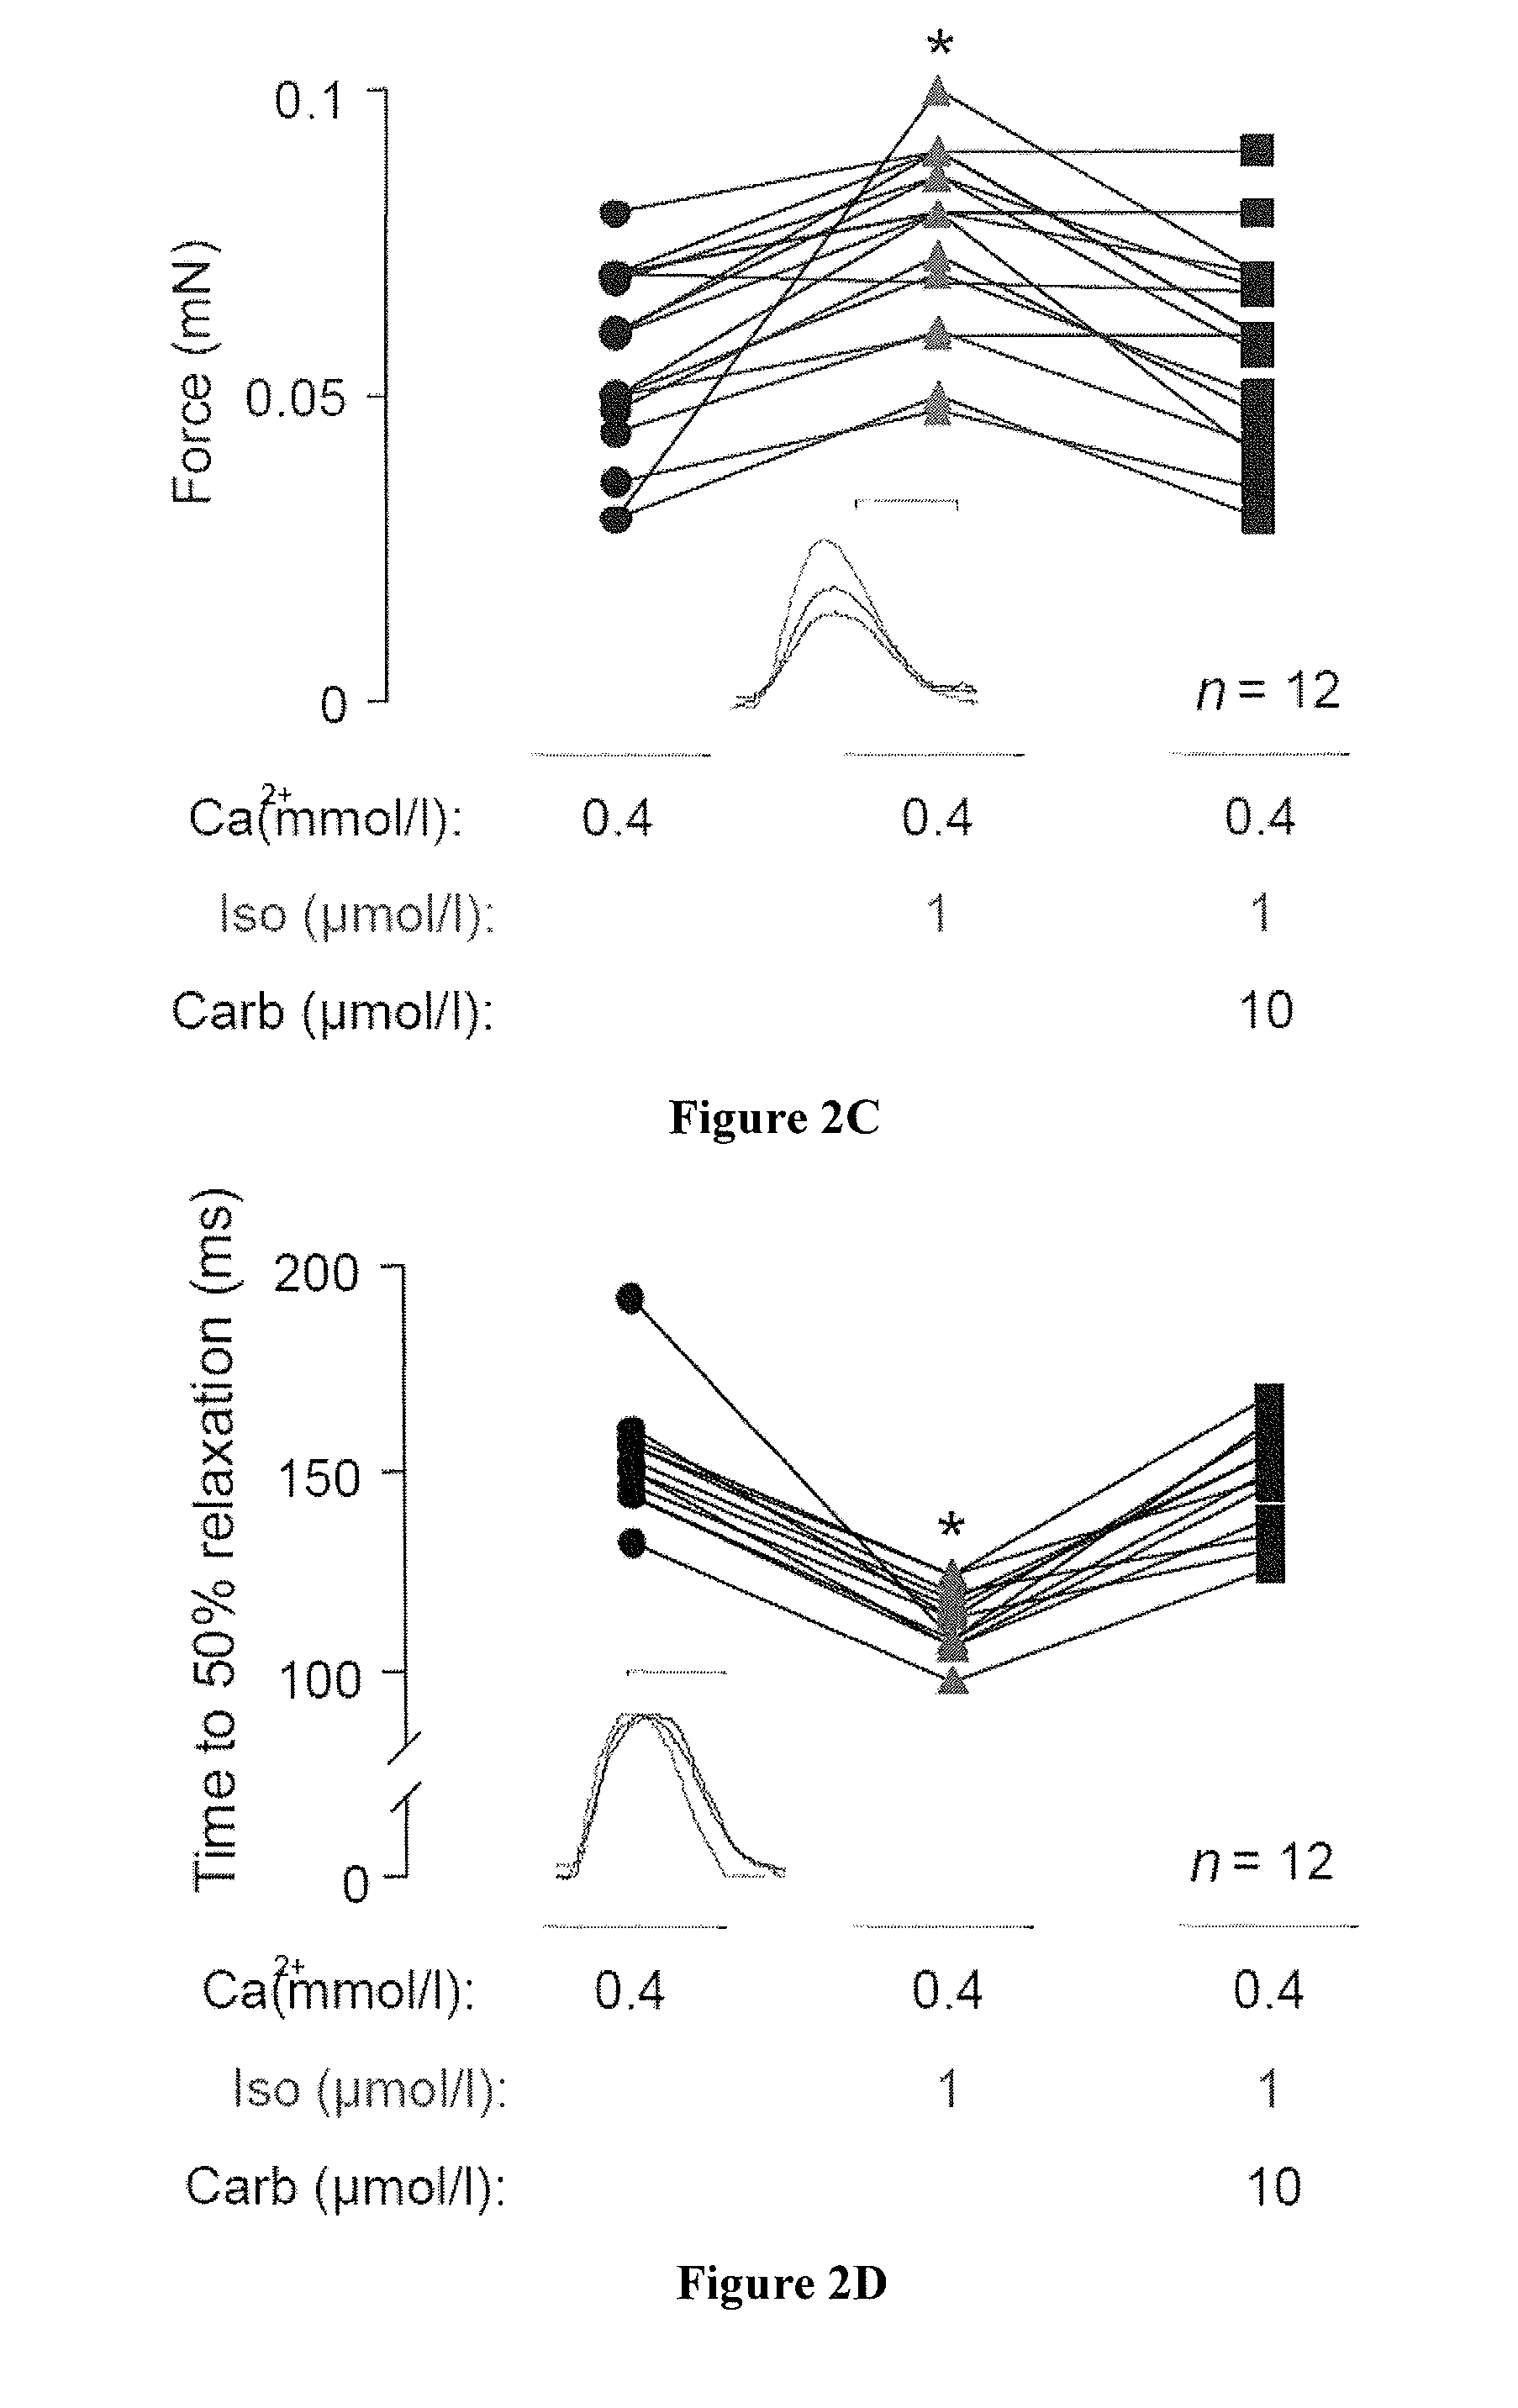 Method for producing engineered heart muscle (EHM)